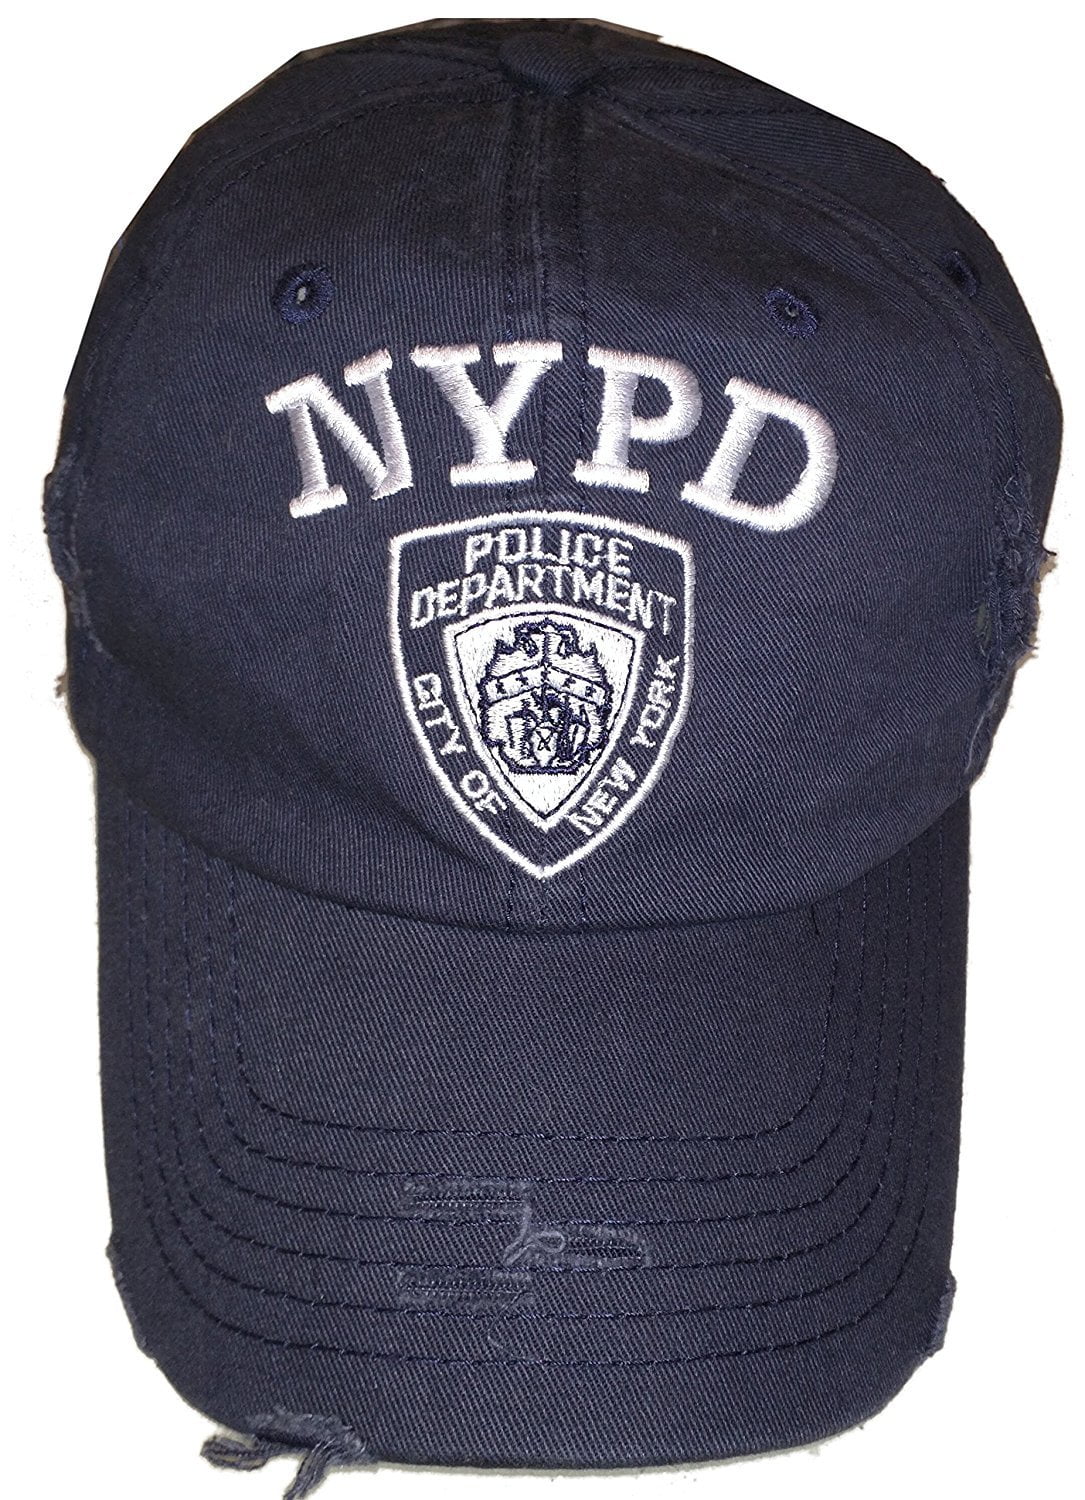 Navy Blue NYPD Baseball Cap Hat Officially Licensed by the NYPD 